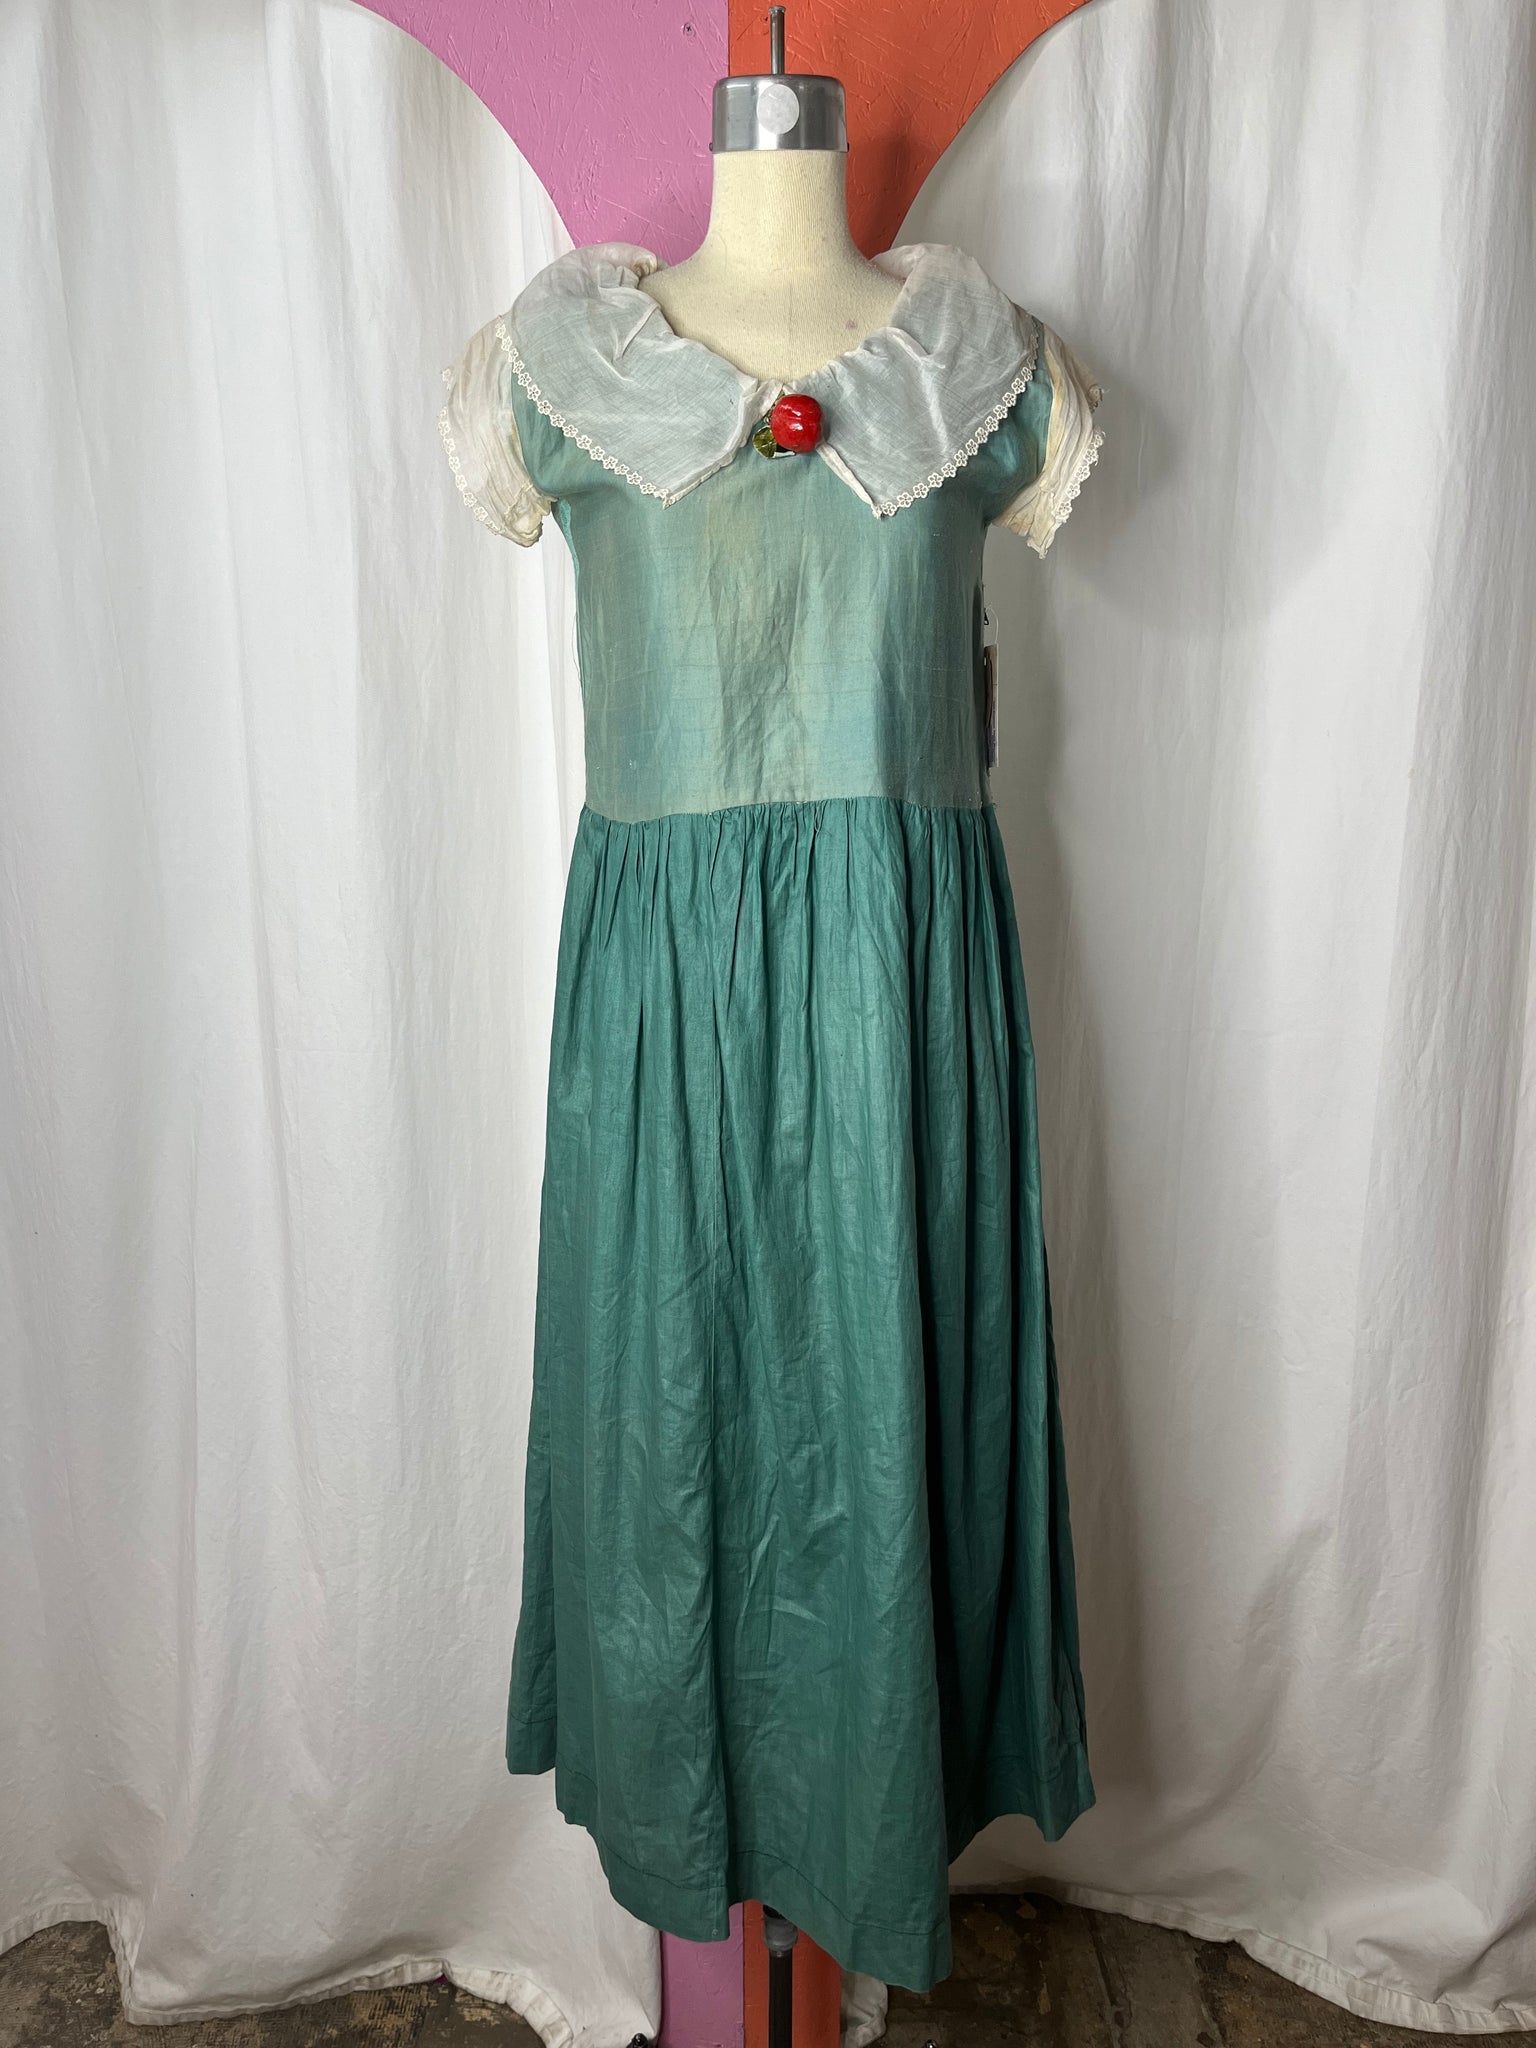 Vintage 1940s | Fruit Costume Dress with Lace Collar | Size M